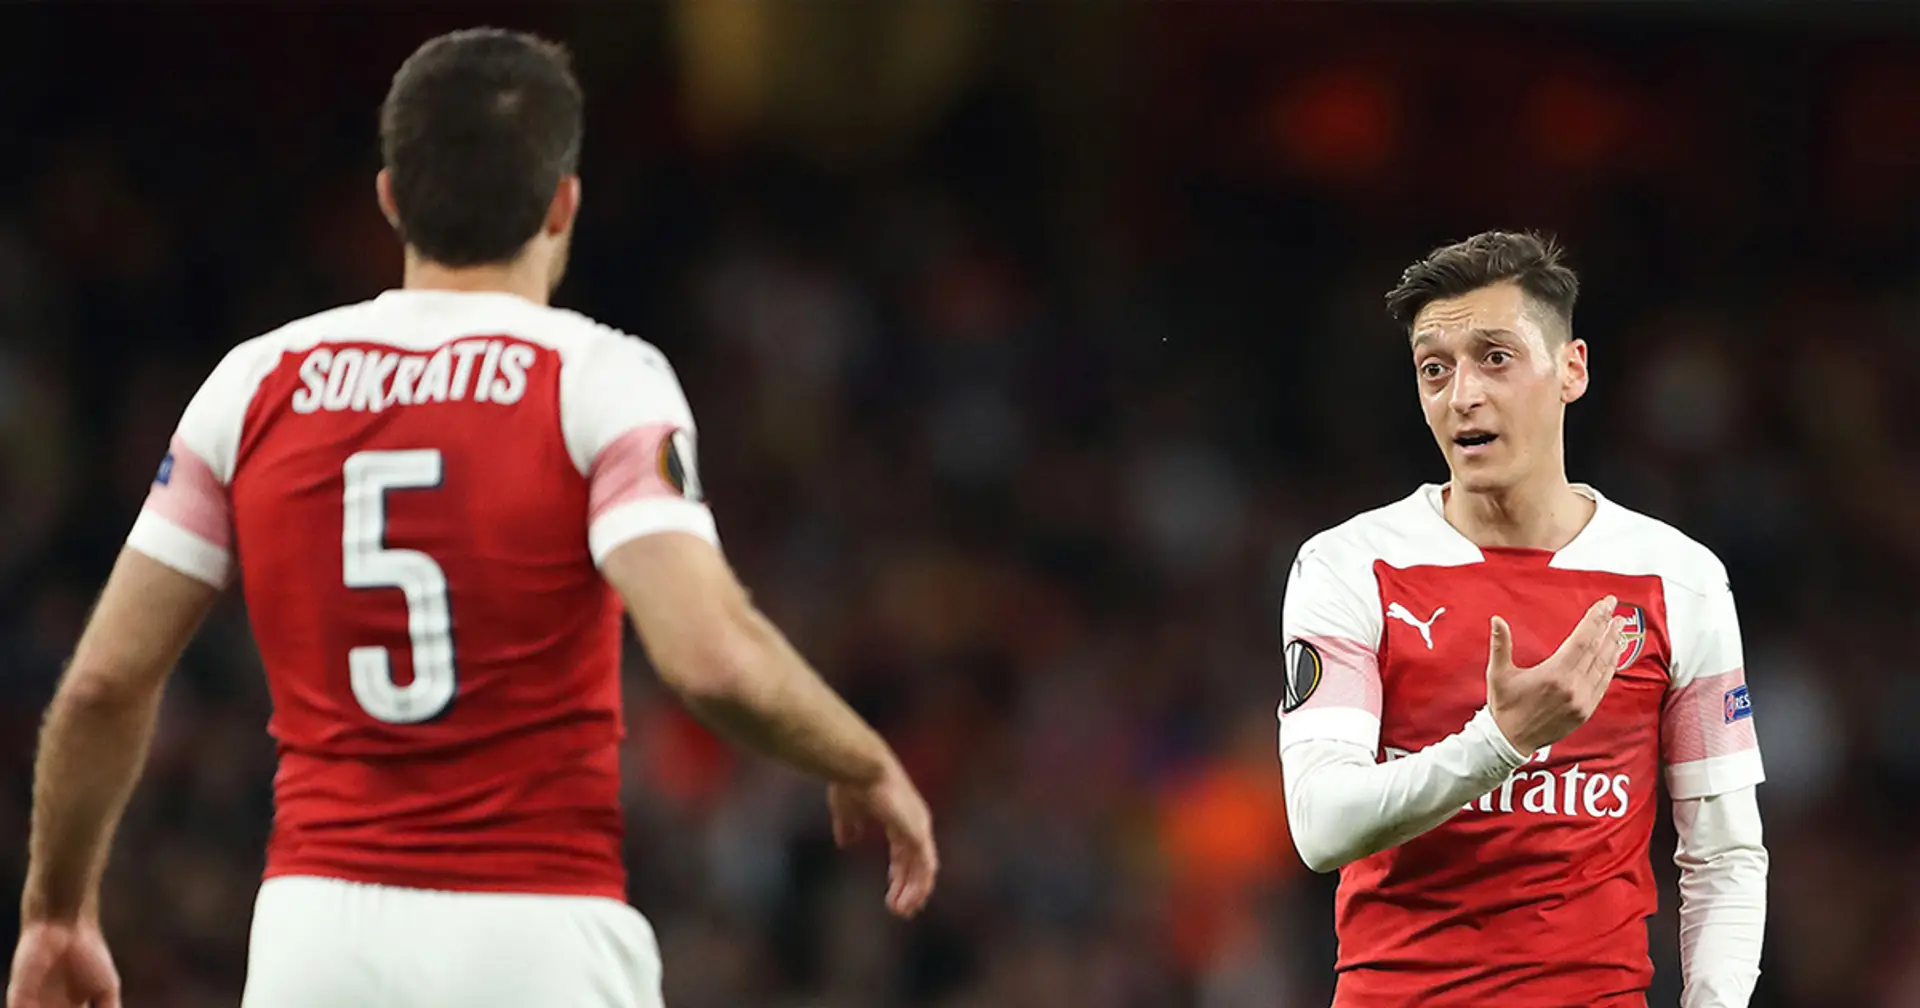 'You have to respect the players' contracts': Arteta insists Arsenal will not pay off Ozil, Sokratis